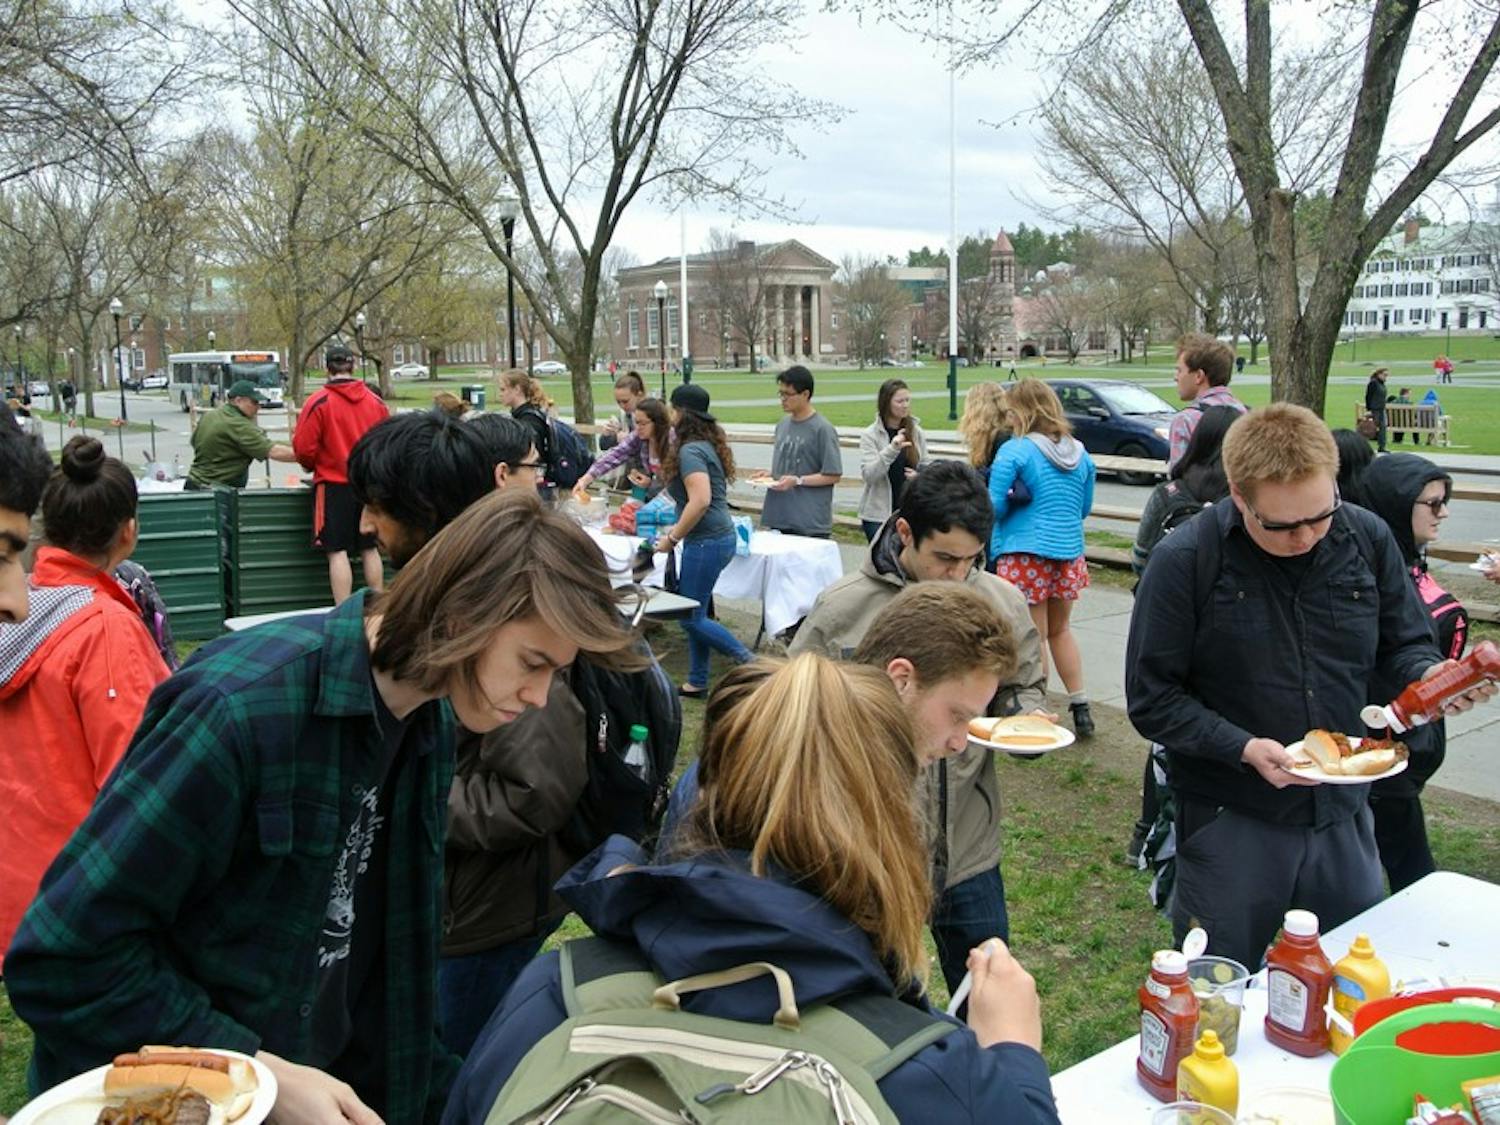 PRIDE hosted a barbeque in front of Collis as part of its programming this year.